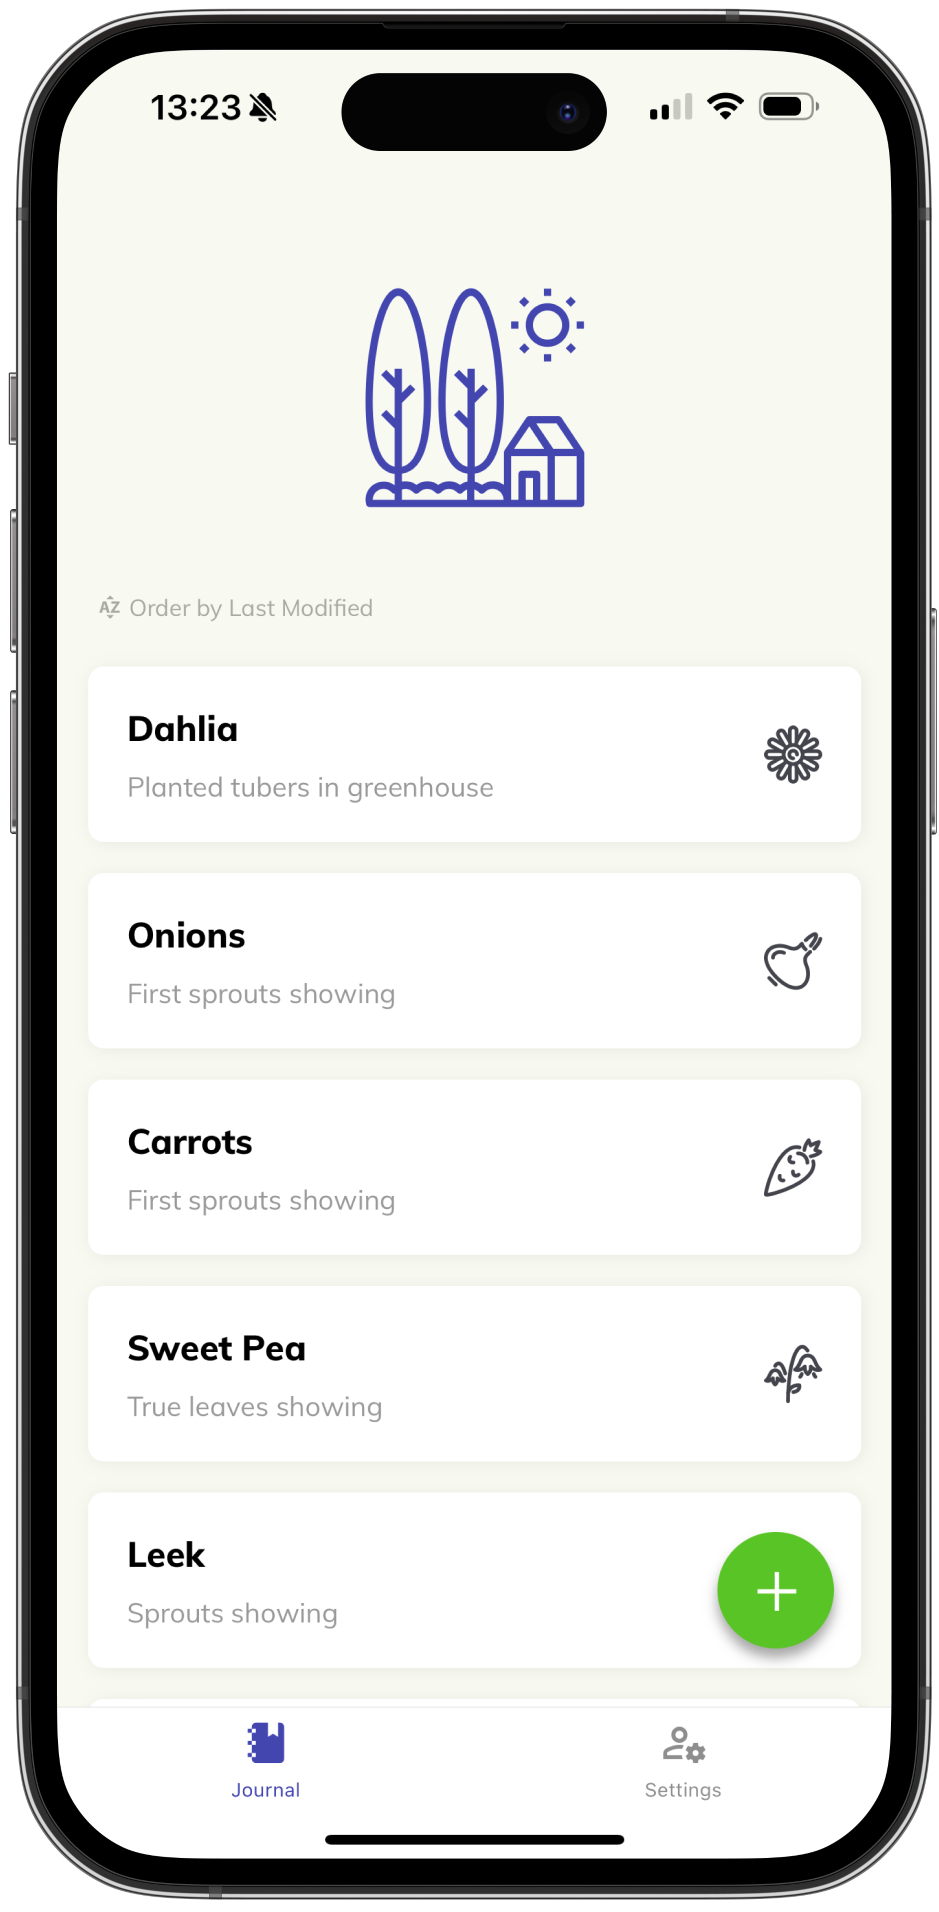 main screen of the app, showing a list of plants with the latest observation against each.